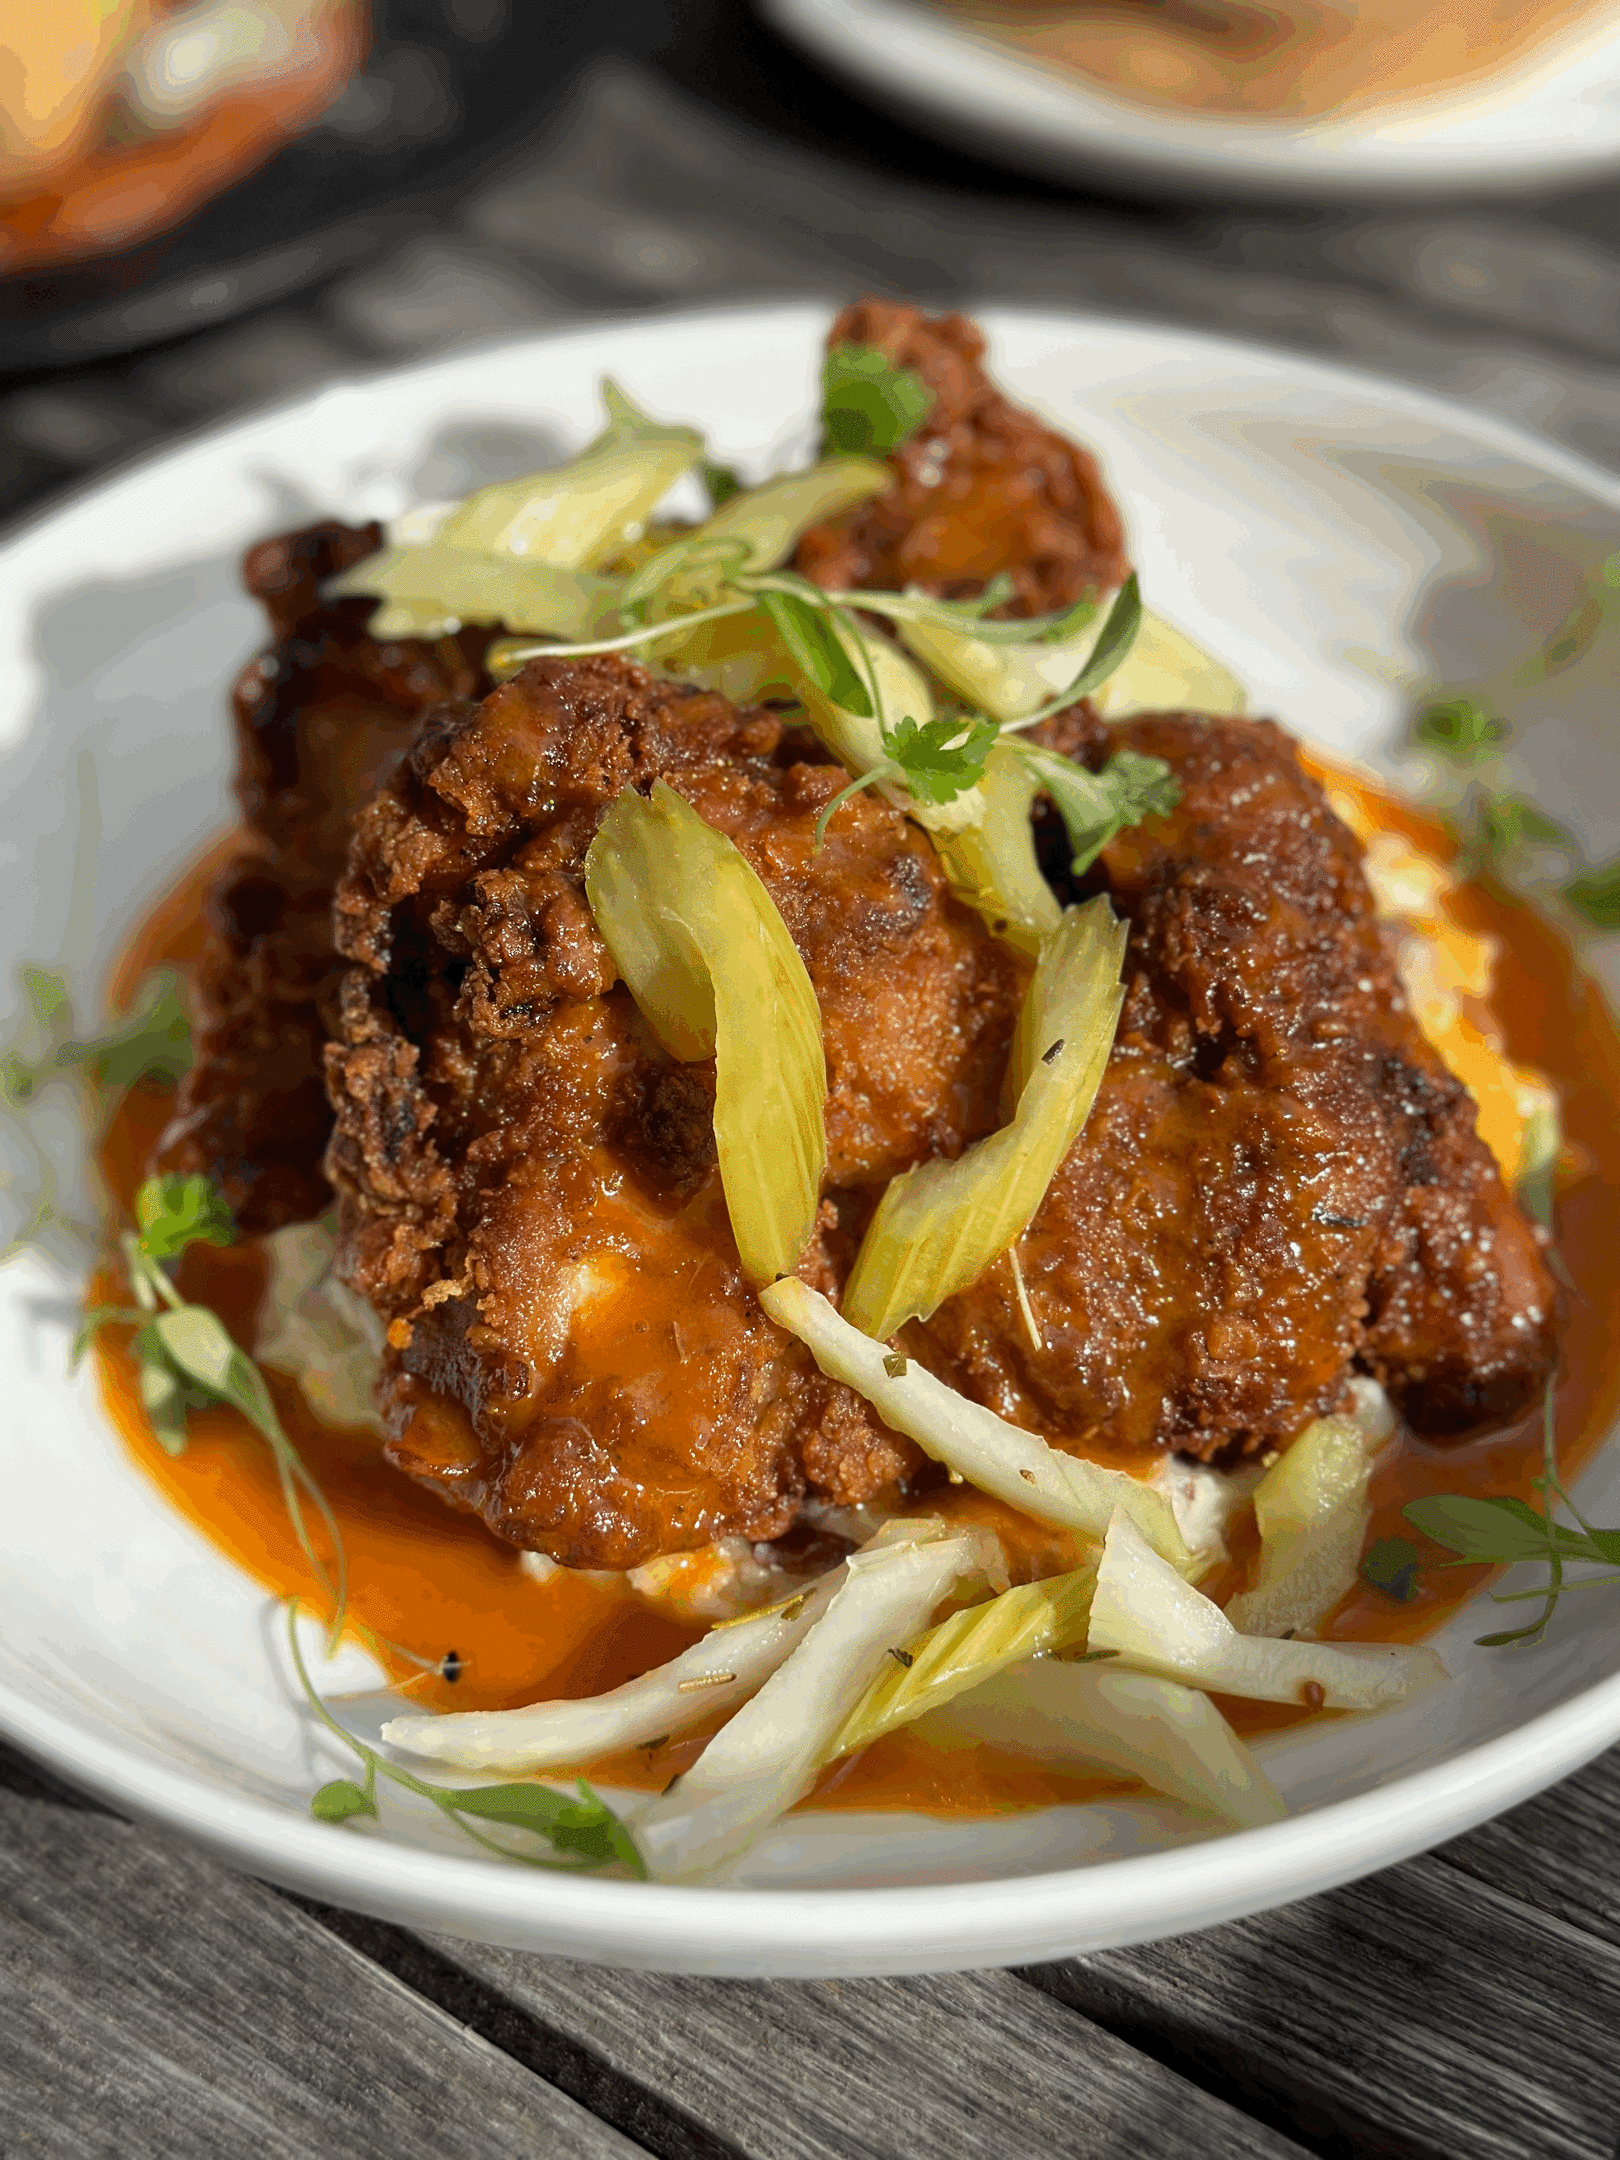 New Menu Item!

Buttermilk Fried Chicken
Red Bliss Whipped Potatoes, Pickled Celery, 
Buttery Hot Sauce